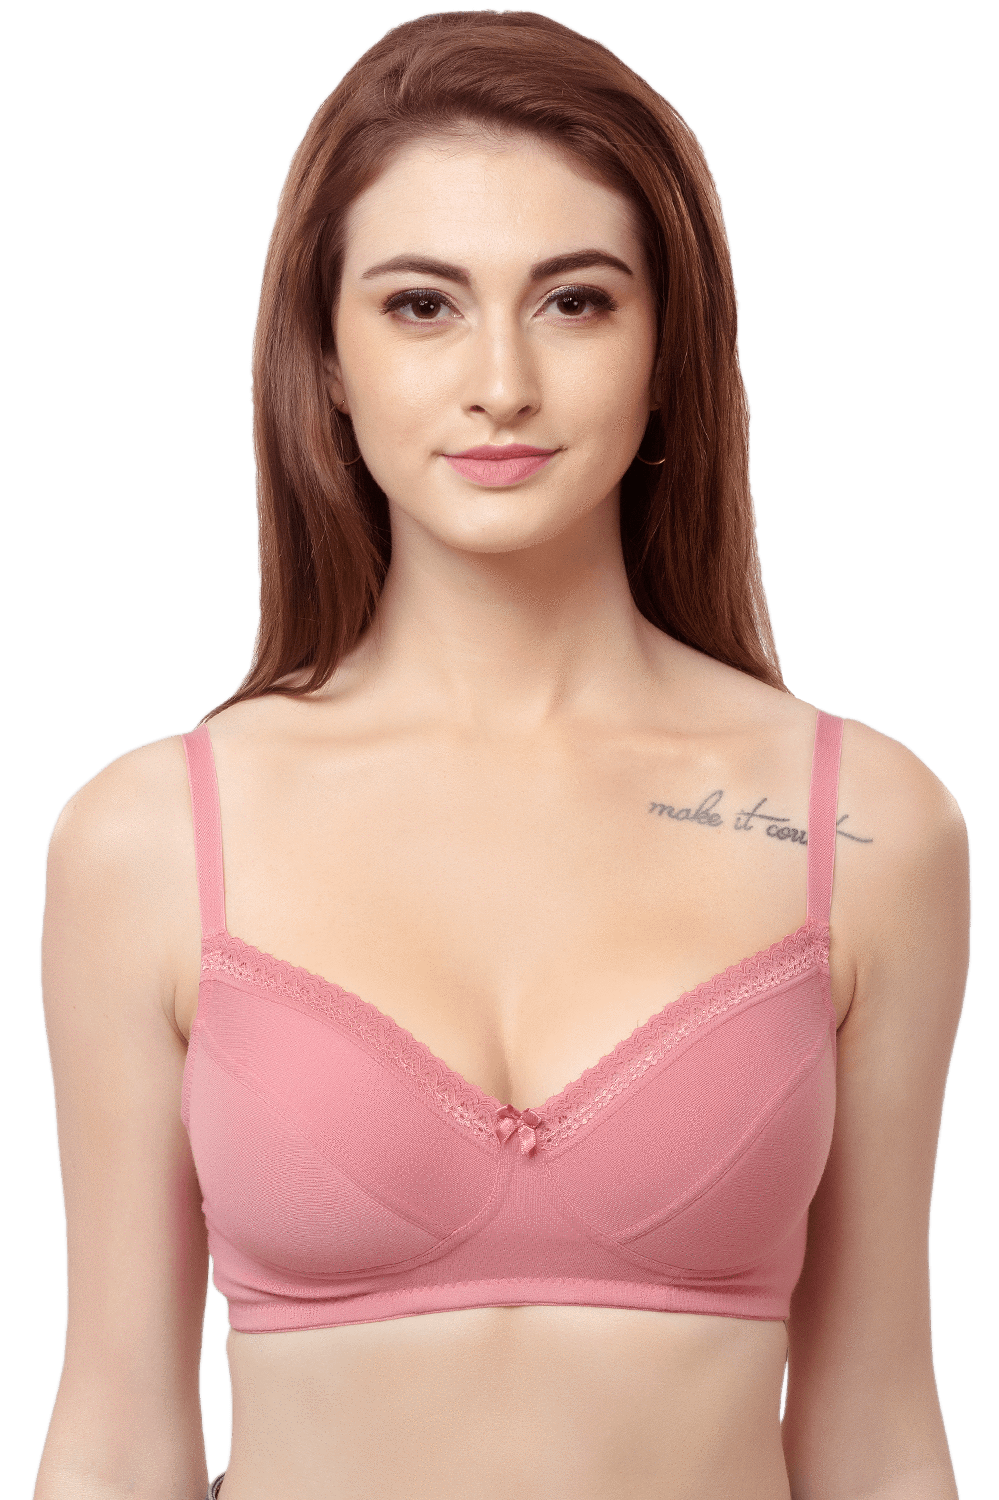 Buy Amante Satin Edge Padded Wired High Coverage Bra - Pink (38D) Online